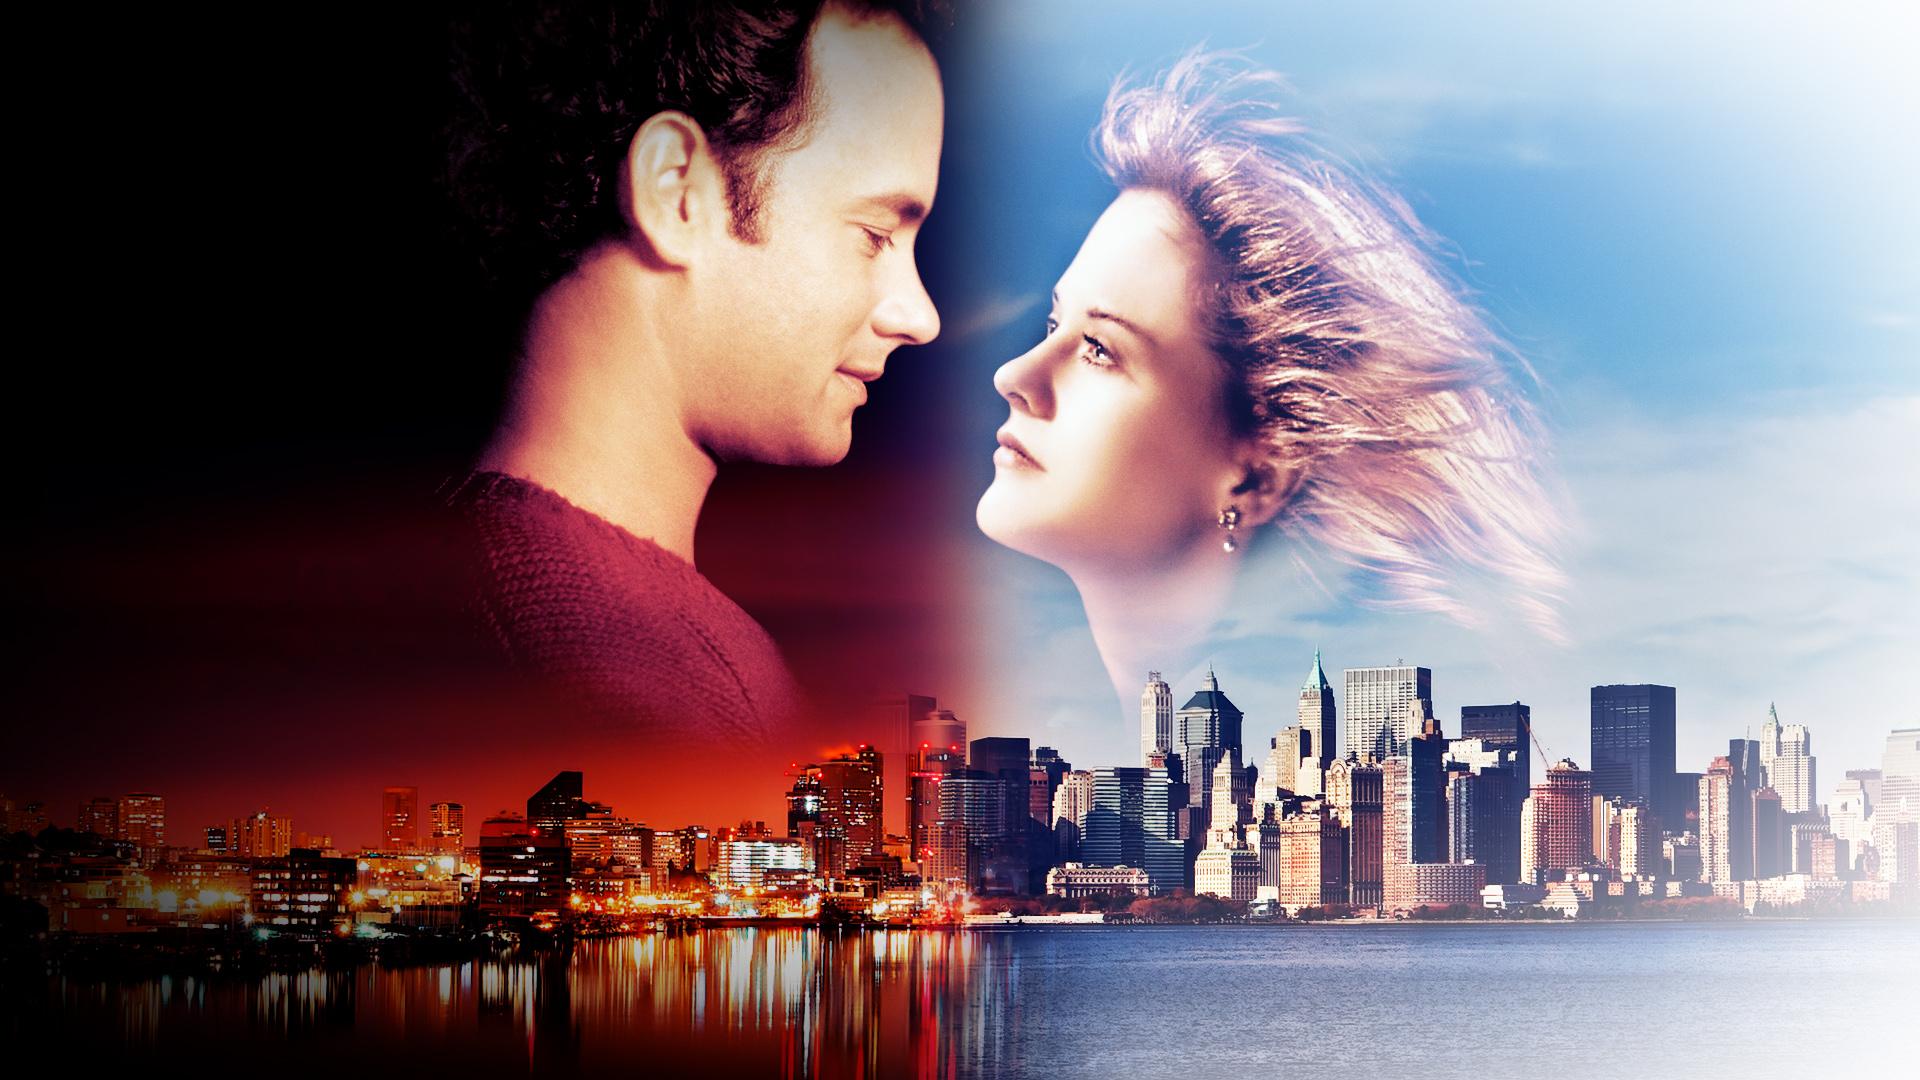 Sleepless In Seattle wallpapers HD quality